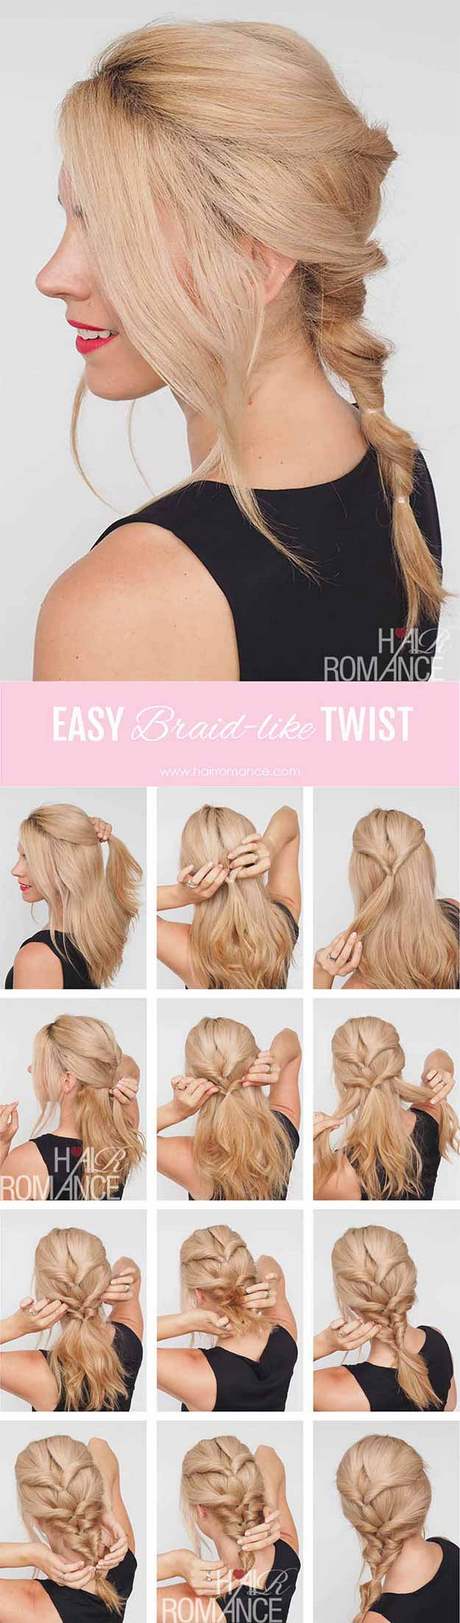 Easy hairstyles for medium length hair for teenagers easy-hairstyles-for-medium-length-hair-for-teenagers-13_16